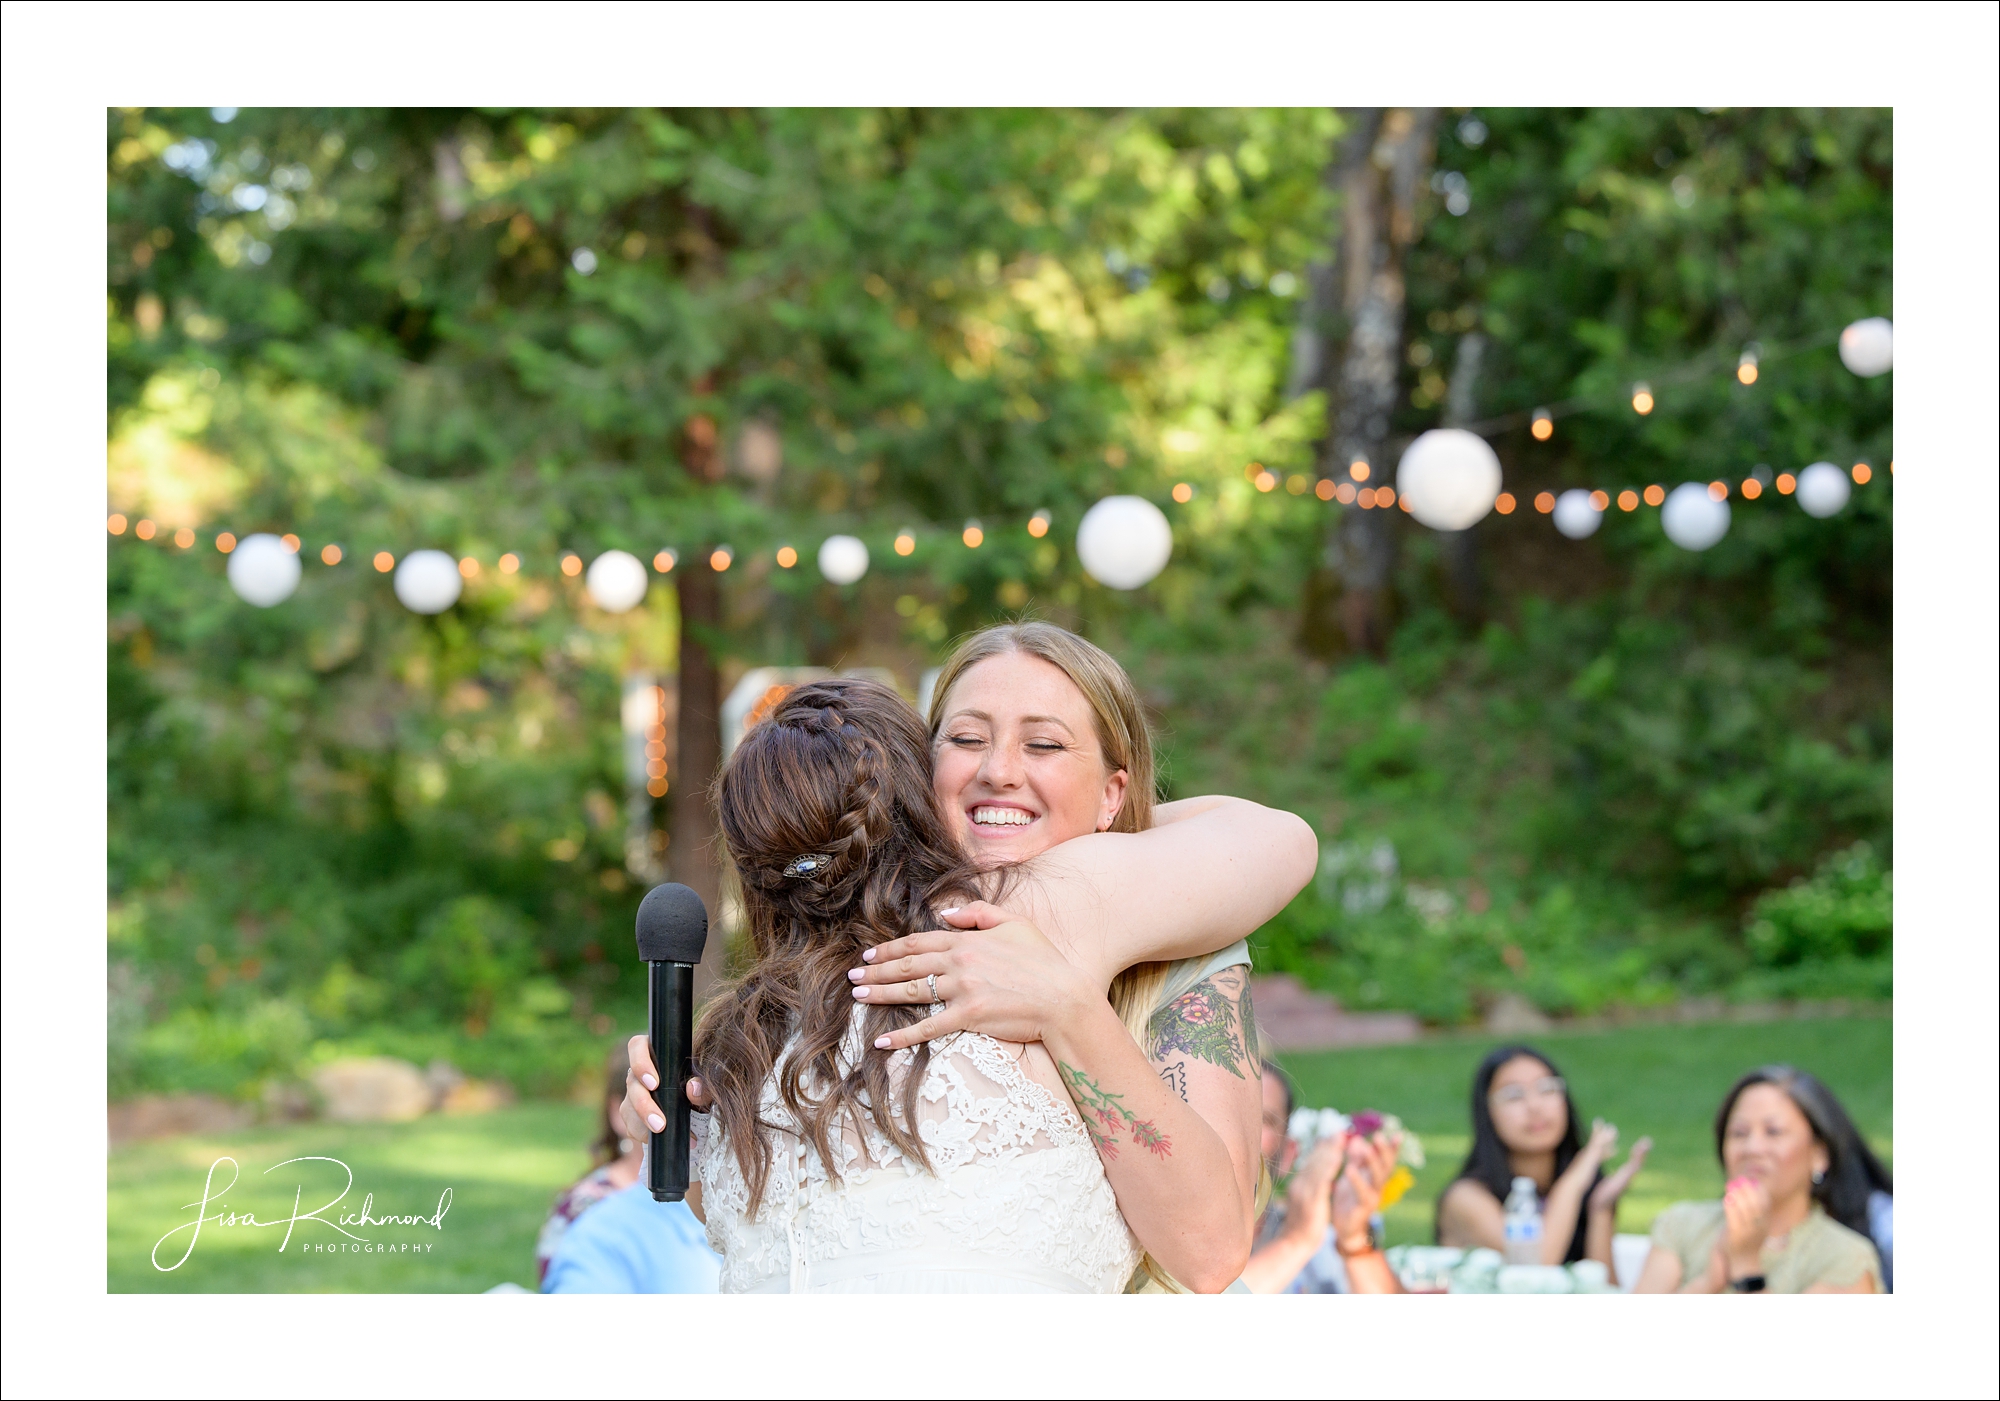 Ashlie and Erik <br> Joining the conga line at Fausel Ranch